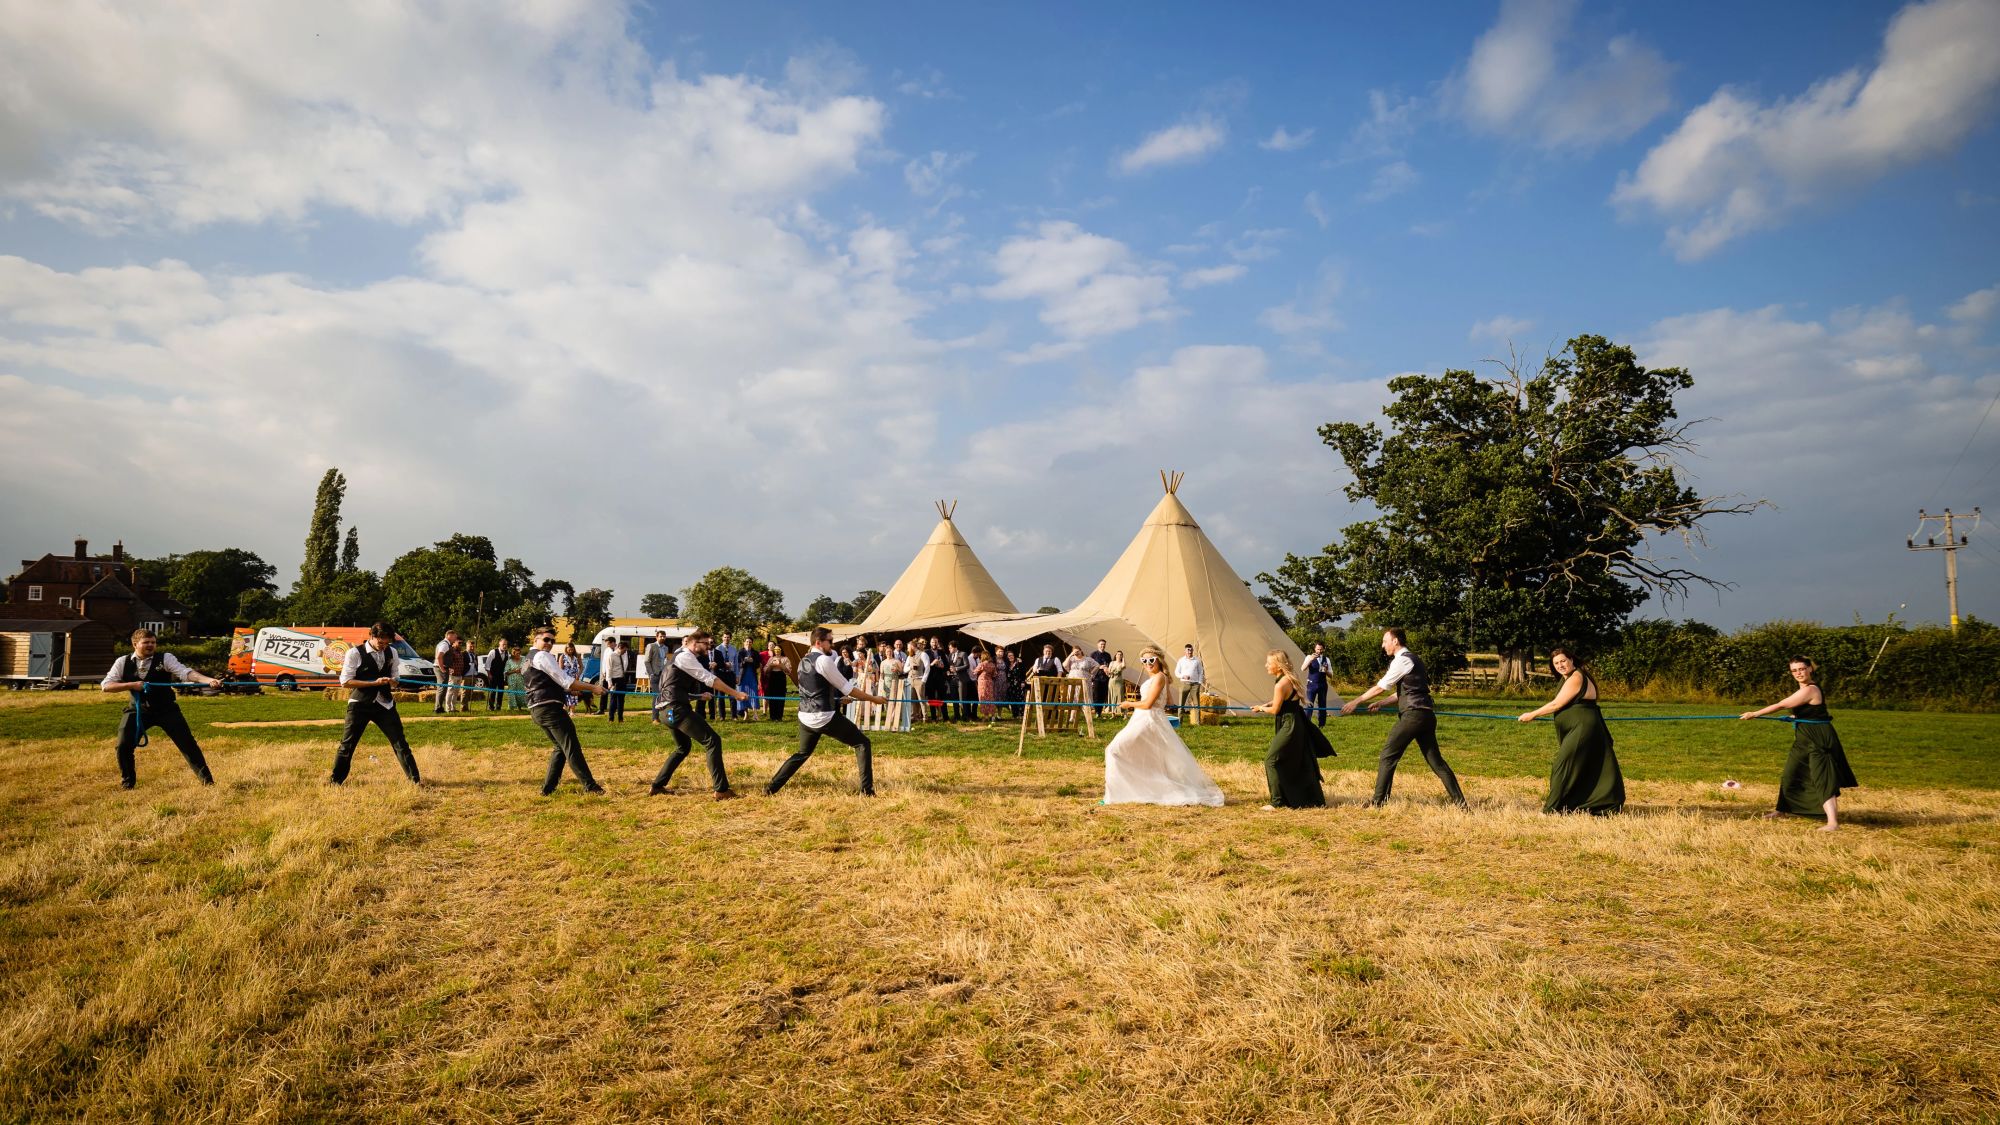 Wedding party in a tug of war located in a field in front of a Tipi under a blue sky